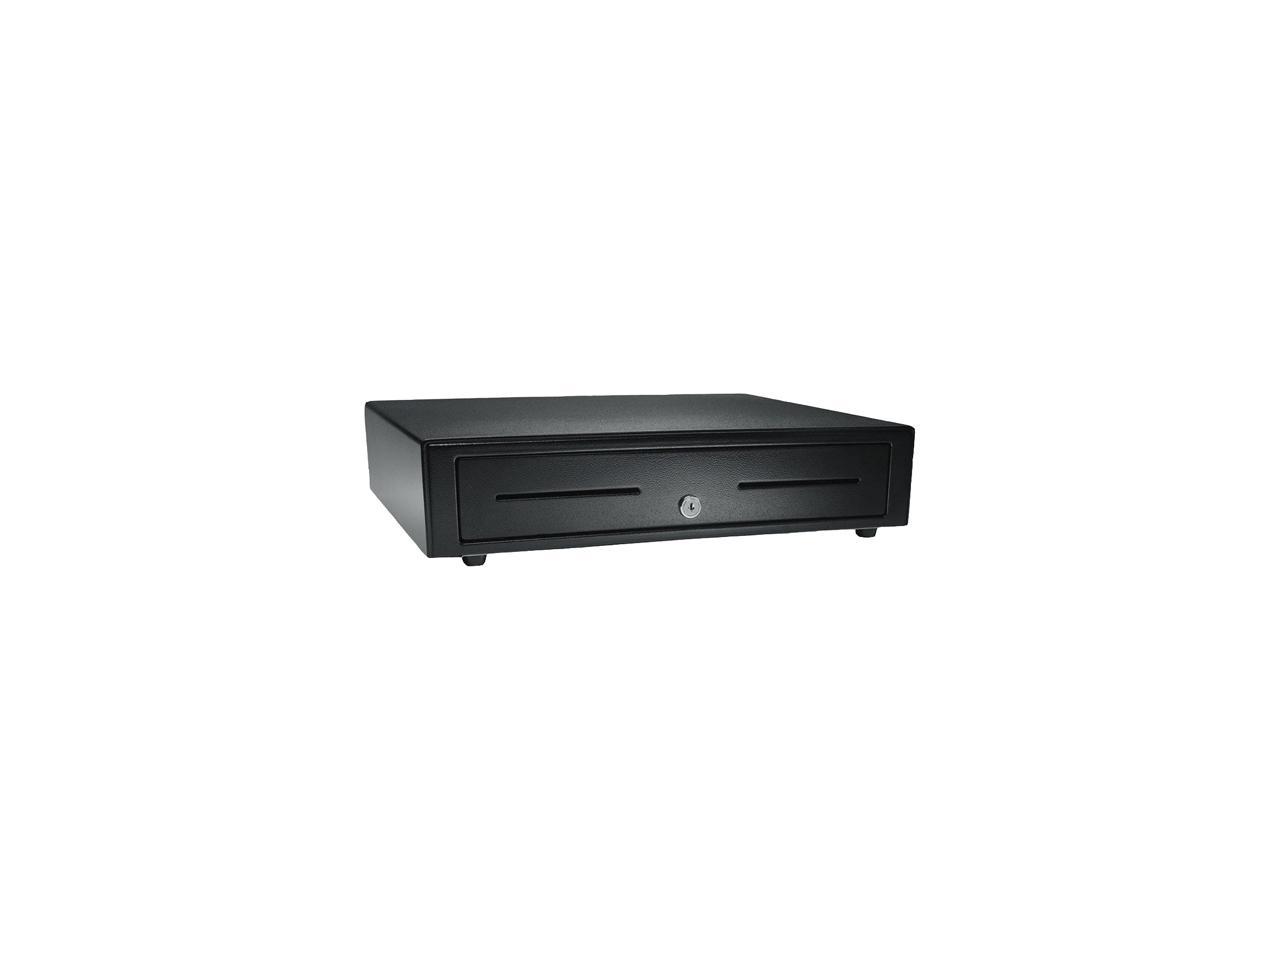 24V 18.8 x 4.3 x 15.2 Black APG VB320-BL1915 Vasario Series Standard-Duty Painted-Front Cash Drawer with MultiPRO 320 Interface 